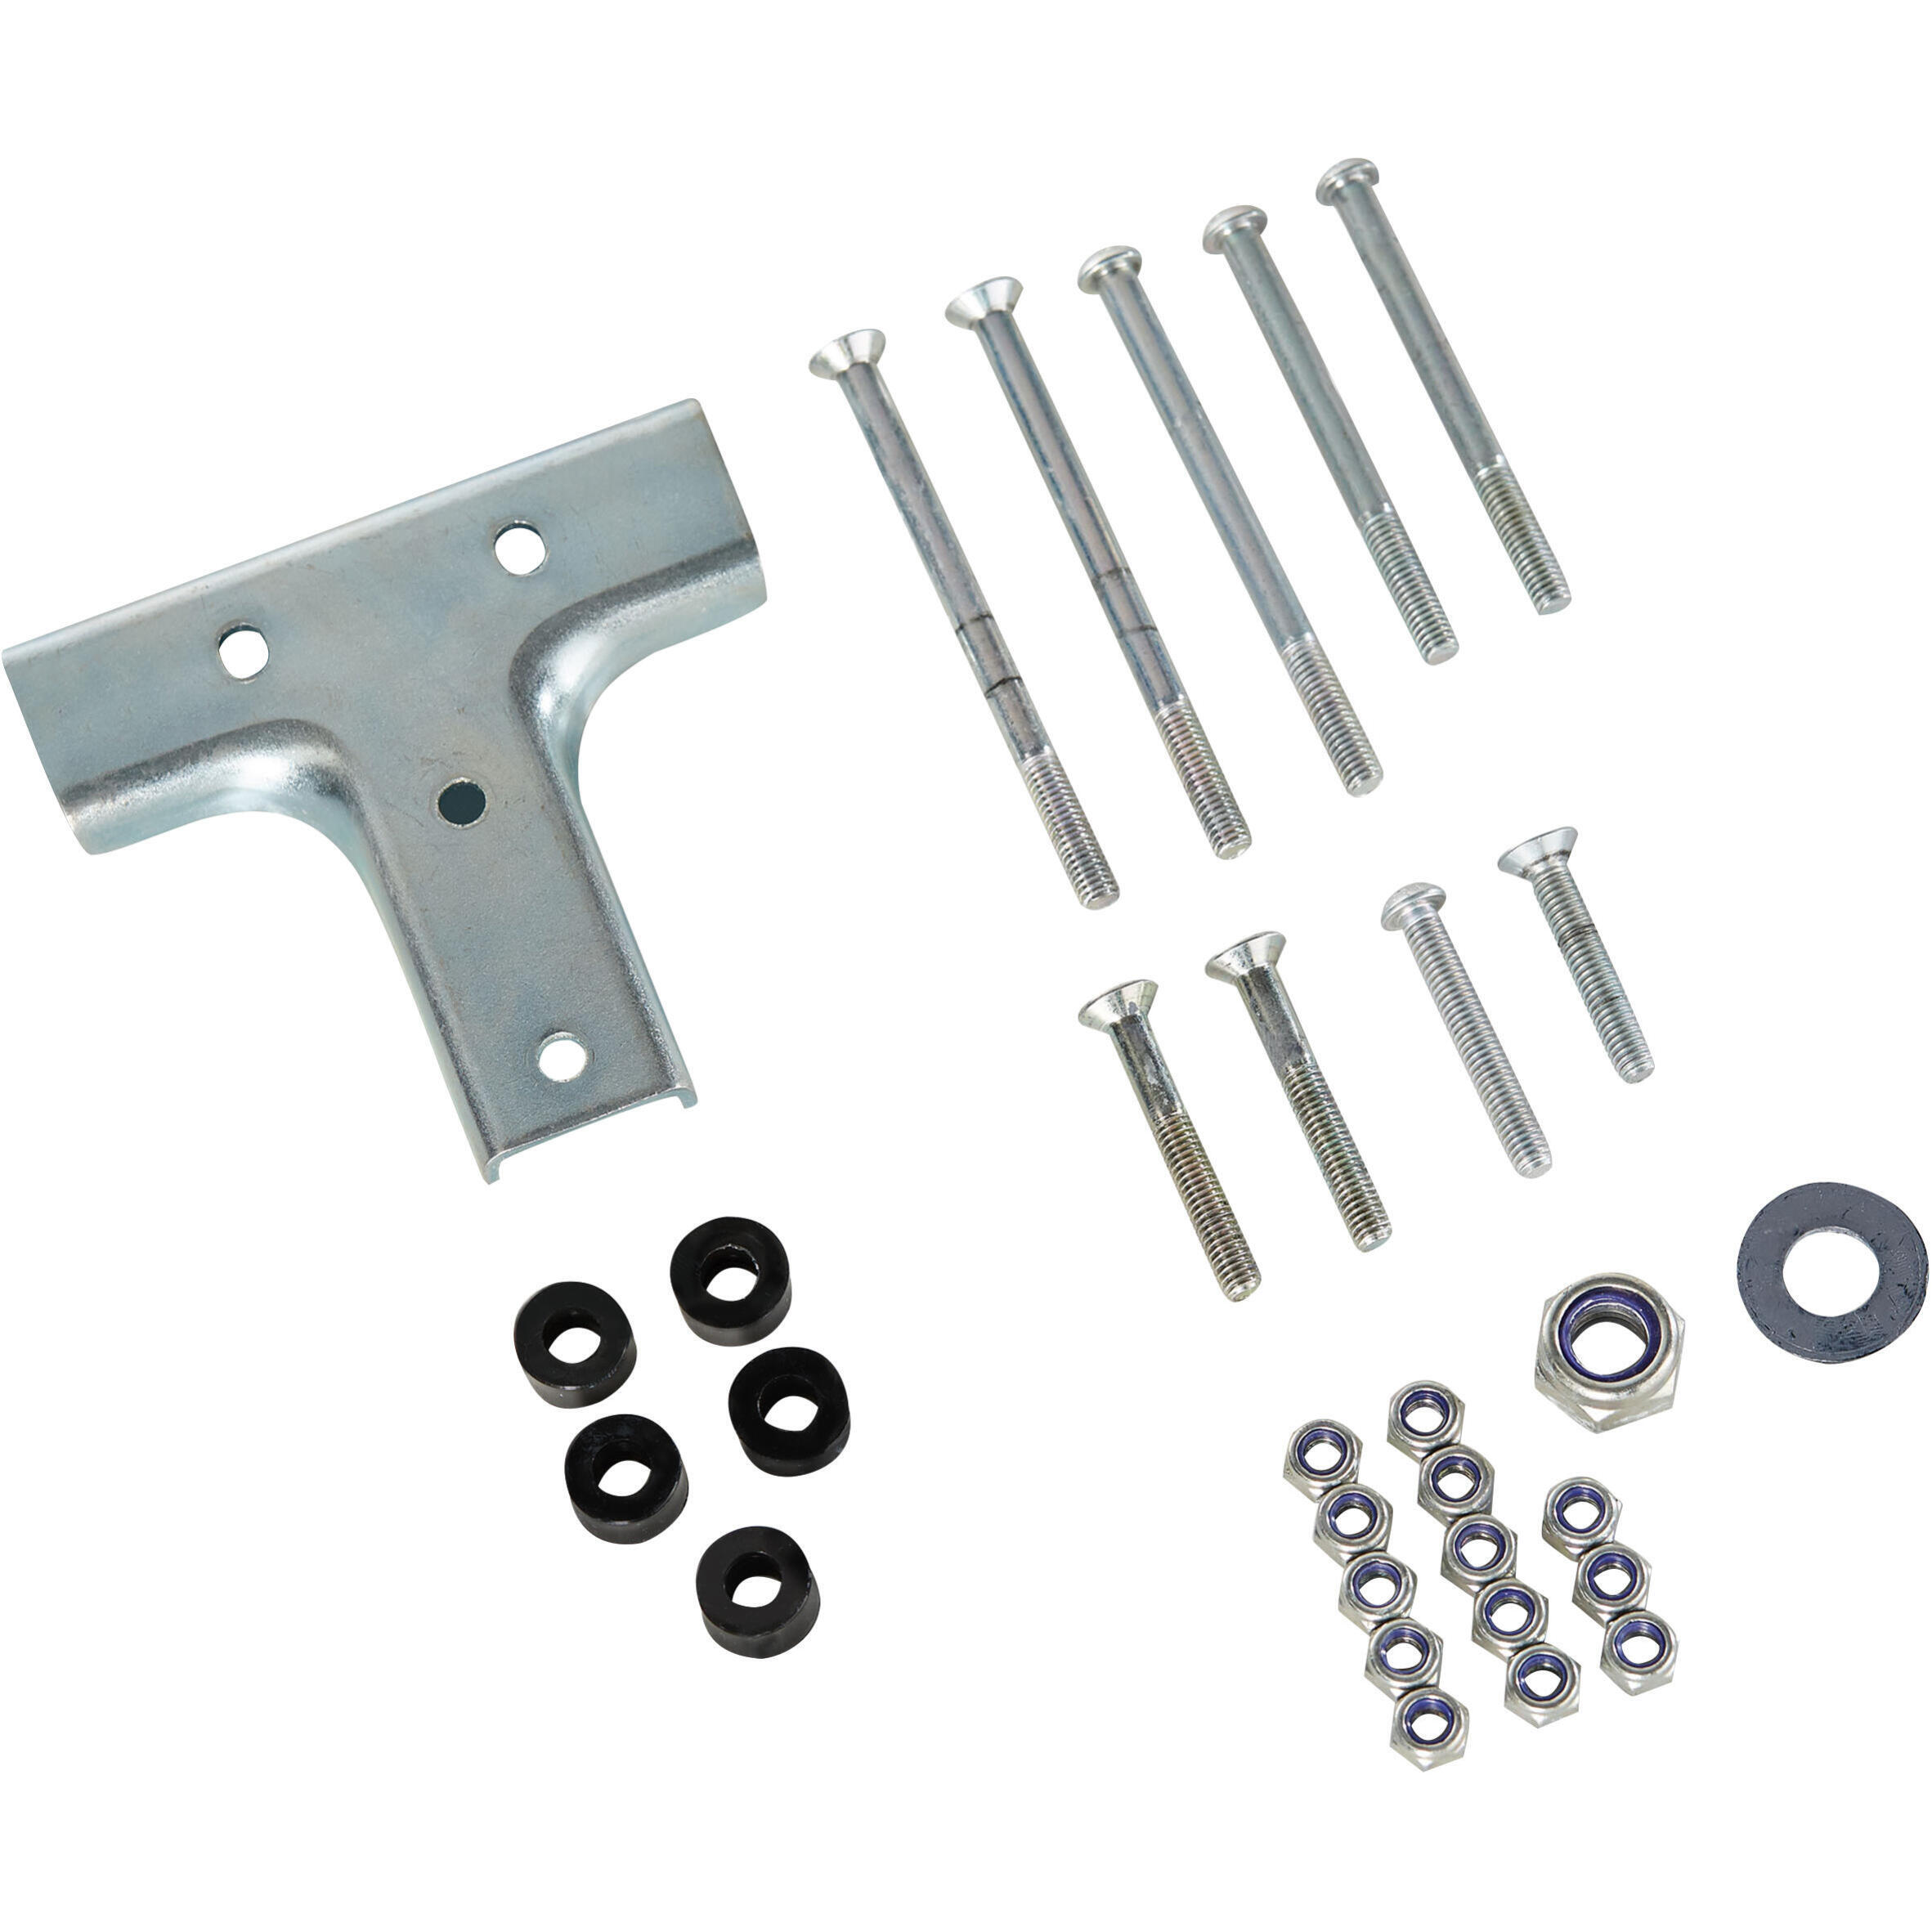 KIT CHASSIS FT 730-830